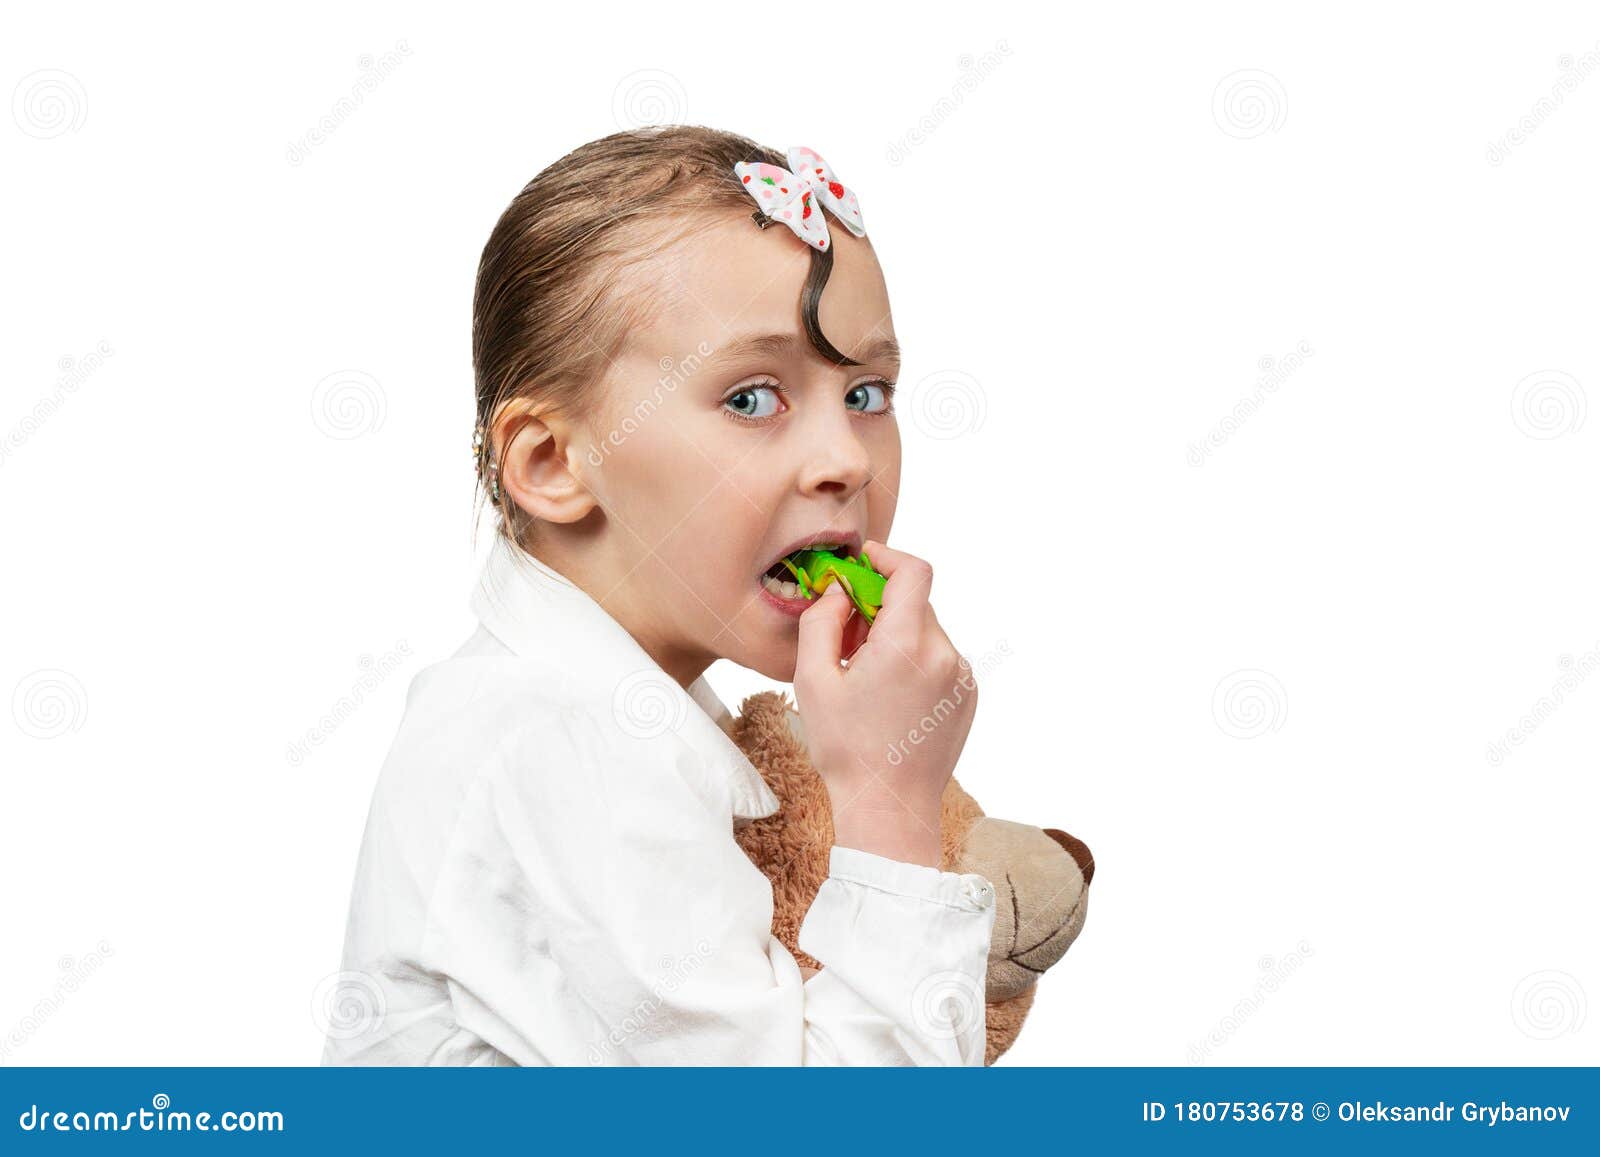 Child Eating a Green Grasshopper Stock Photo - Image of background ...